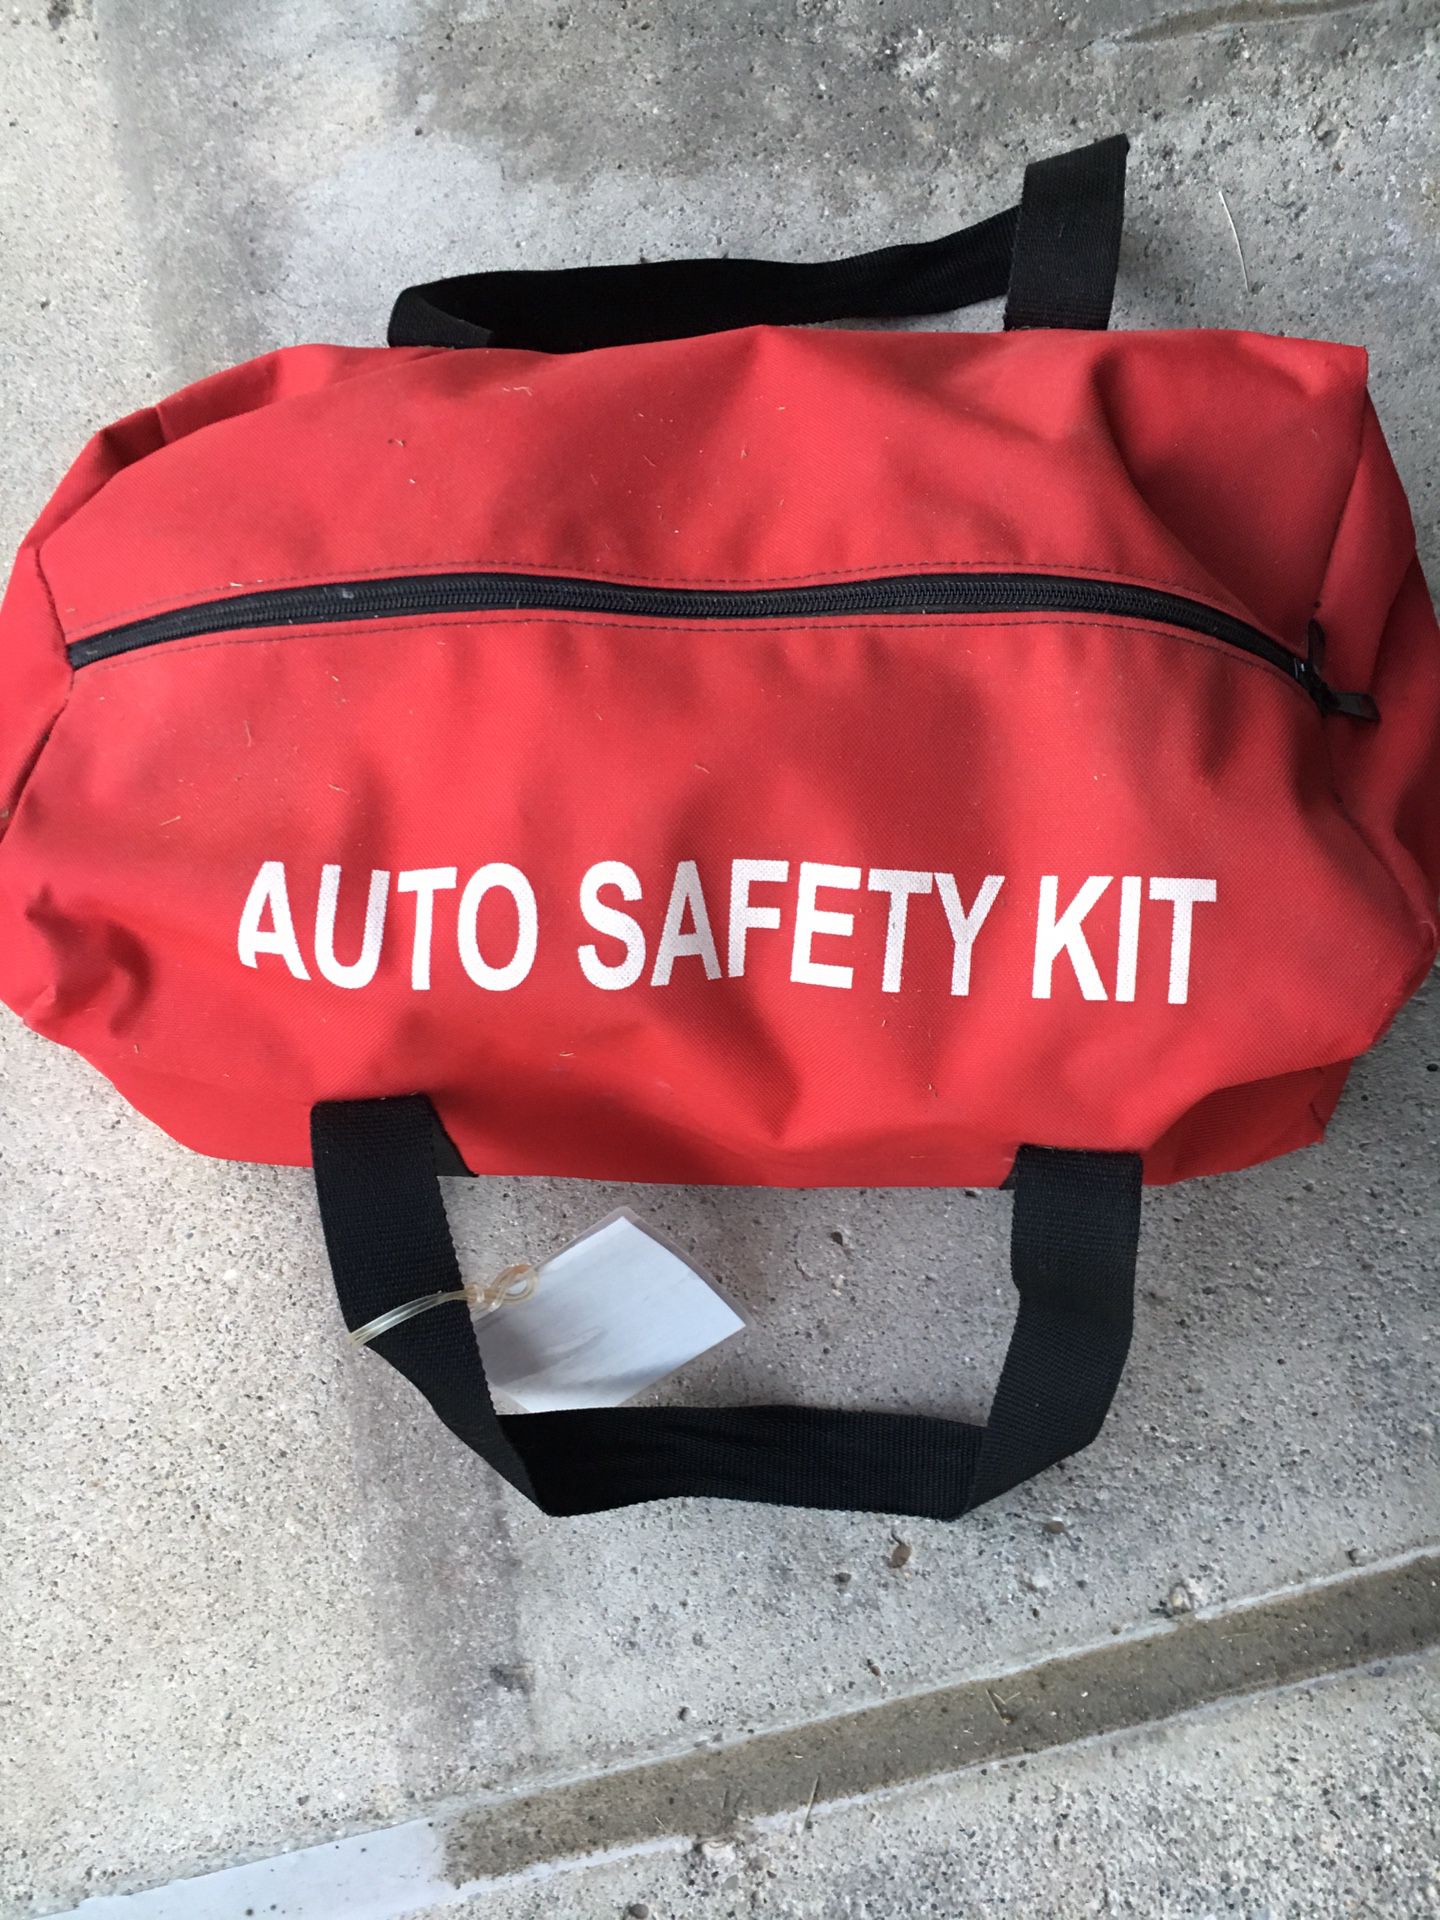 Auto Safety Kit Duffle Bag Deluxe